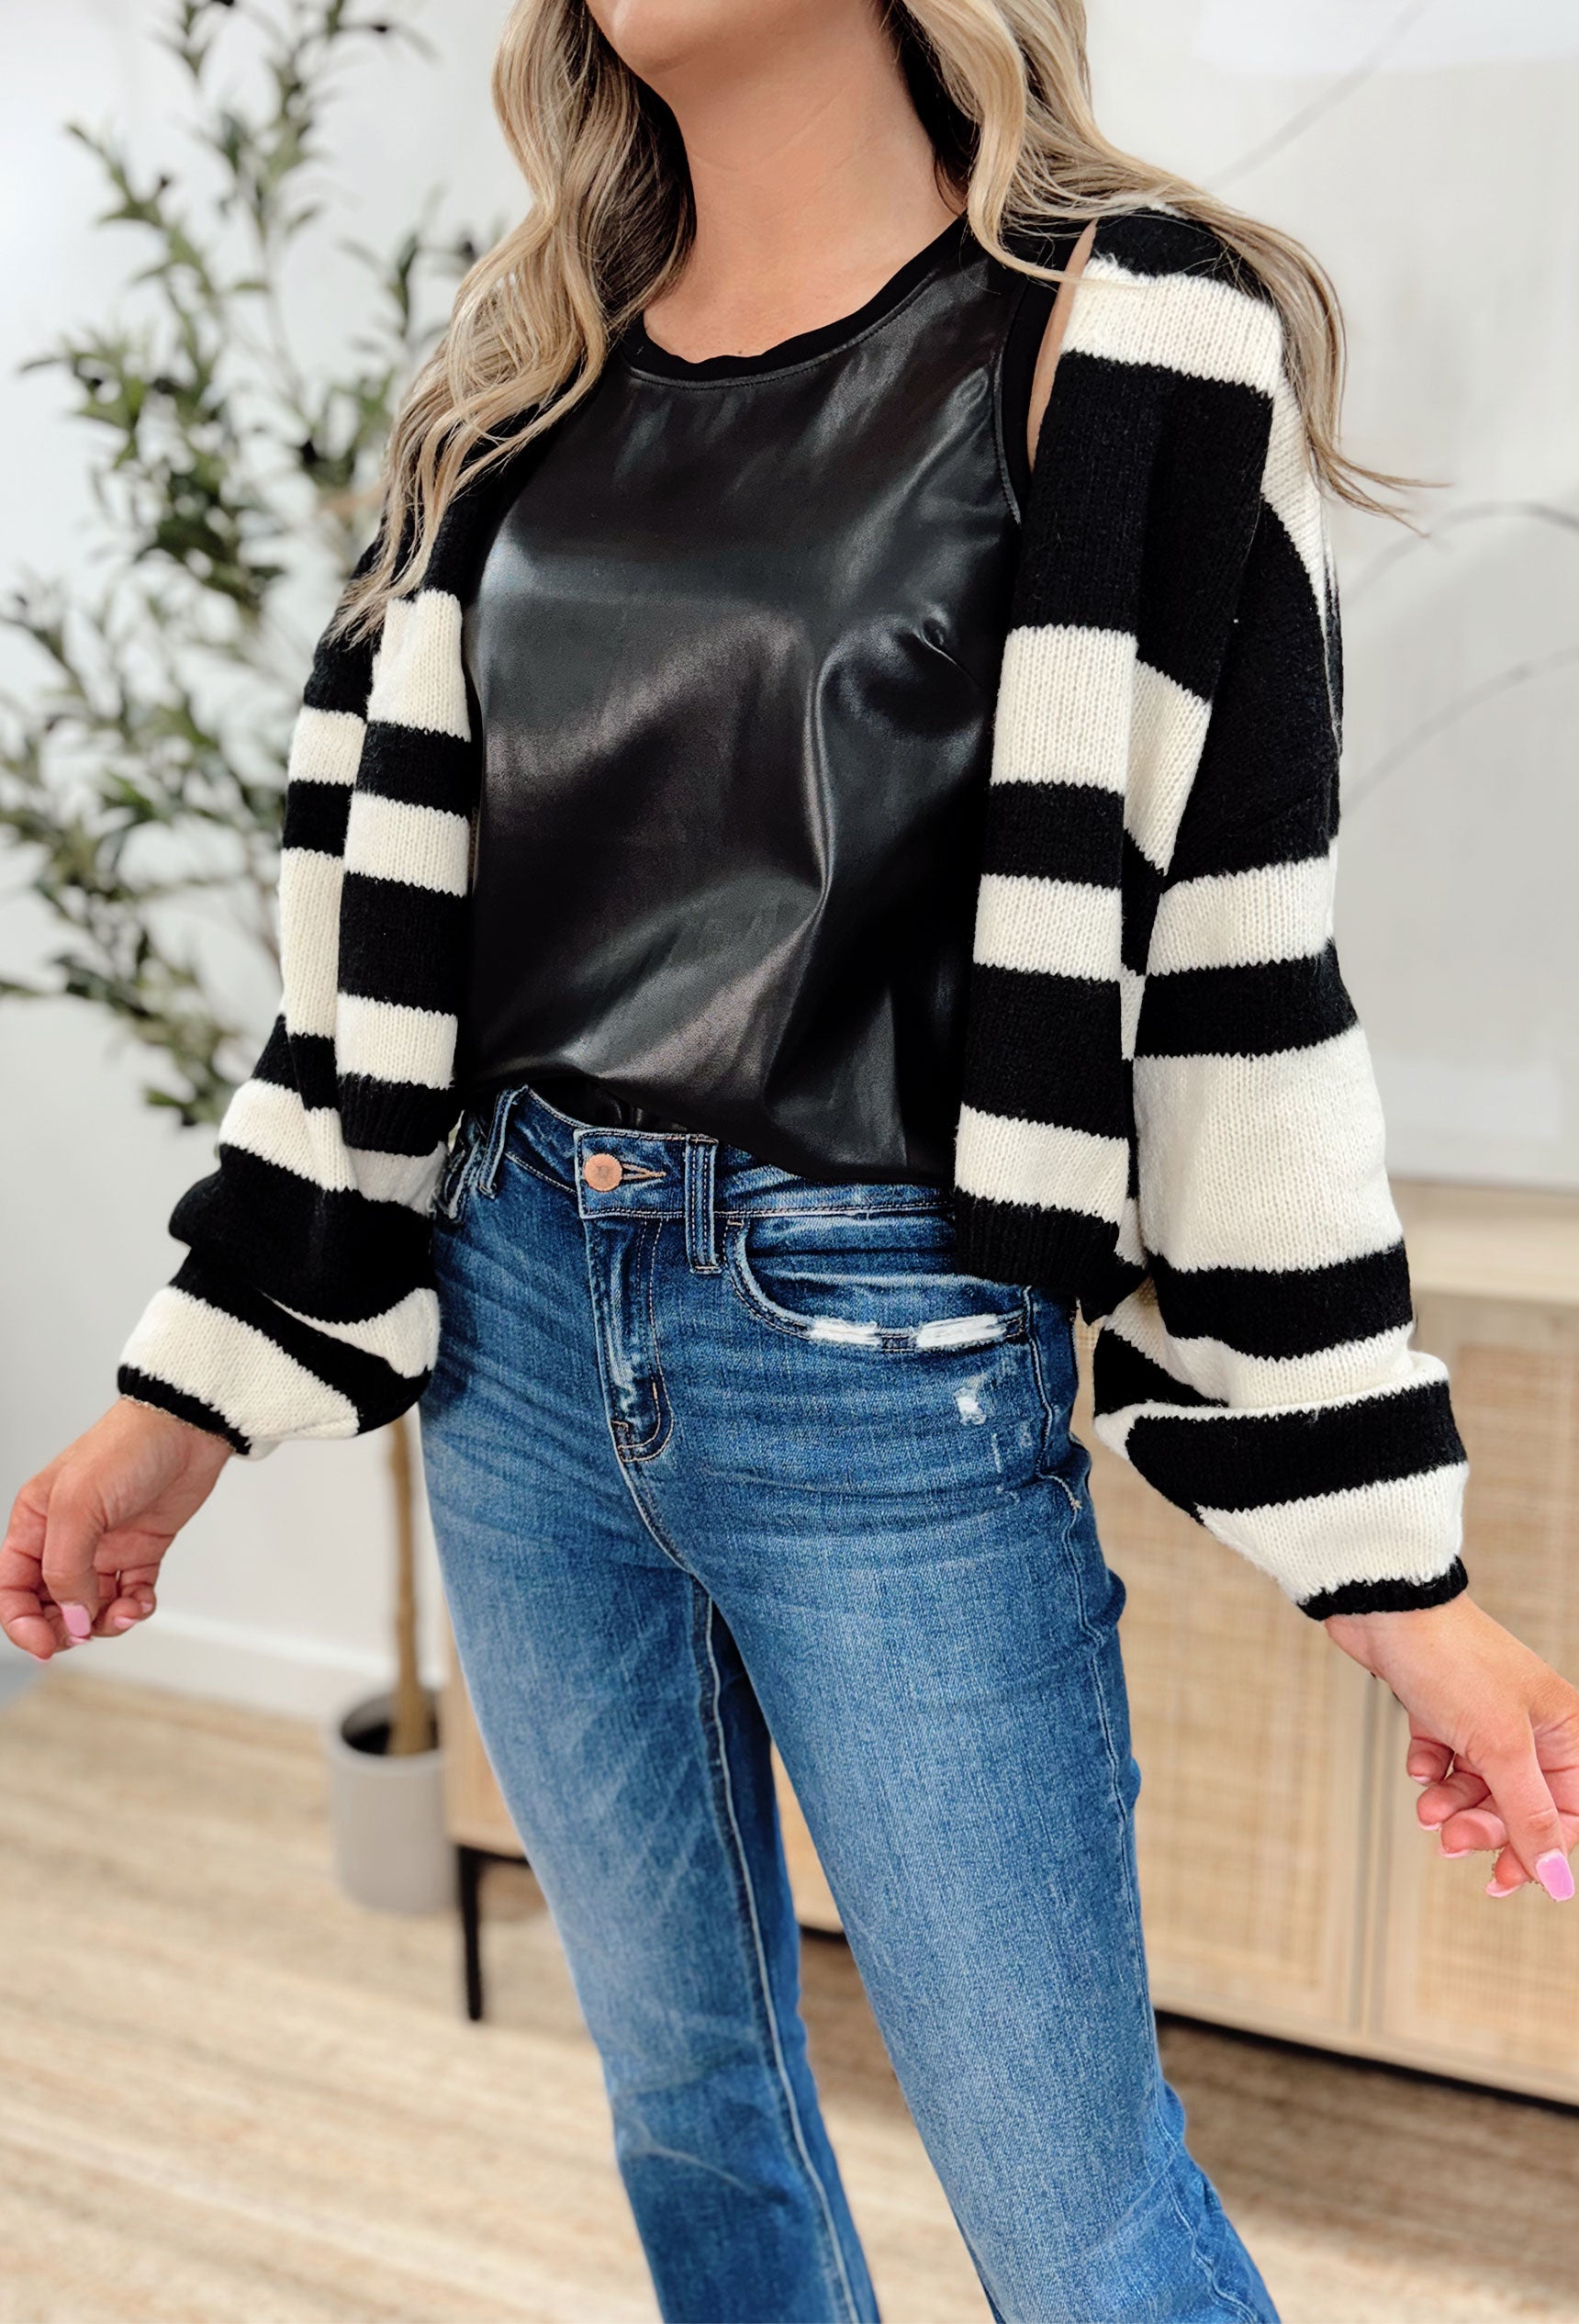 Taking Sides Striped Cardigan, black and white cropped cardigan